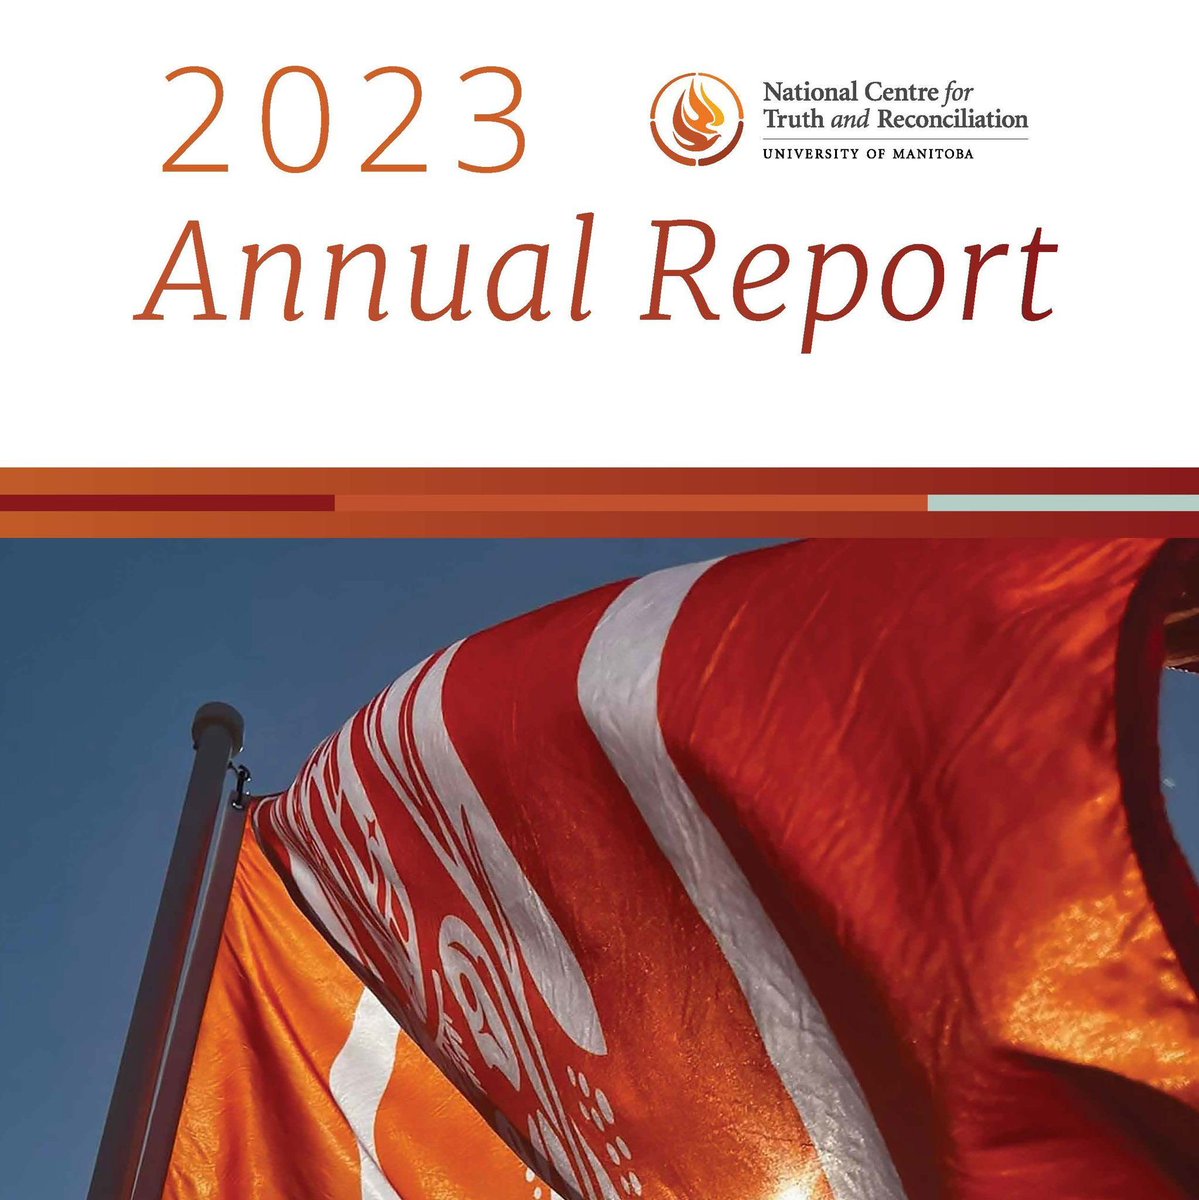 The NCTR is pleased to share the 2023 Annual Report! We had a very busy year in 2023 and we expect that will continue throughout 2024 as we move forward with the delivery of our mandate and priorities. Check out the report on our website! buff.ly/4aSEoNJ #nctr_um